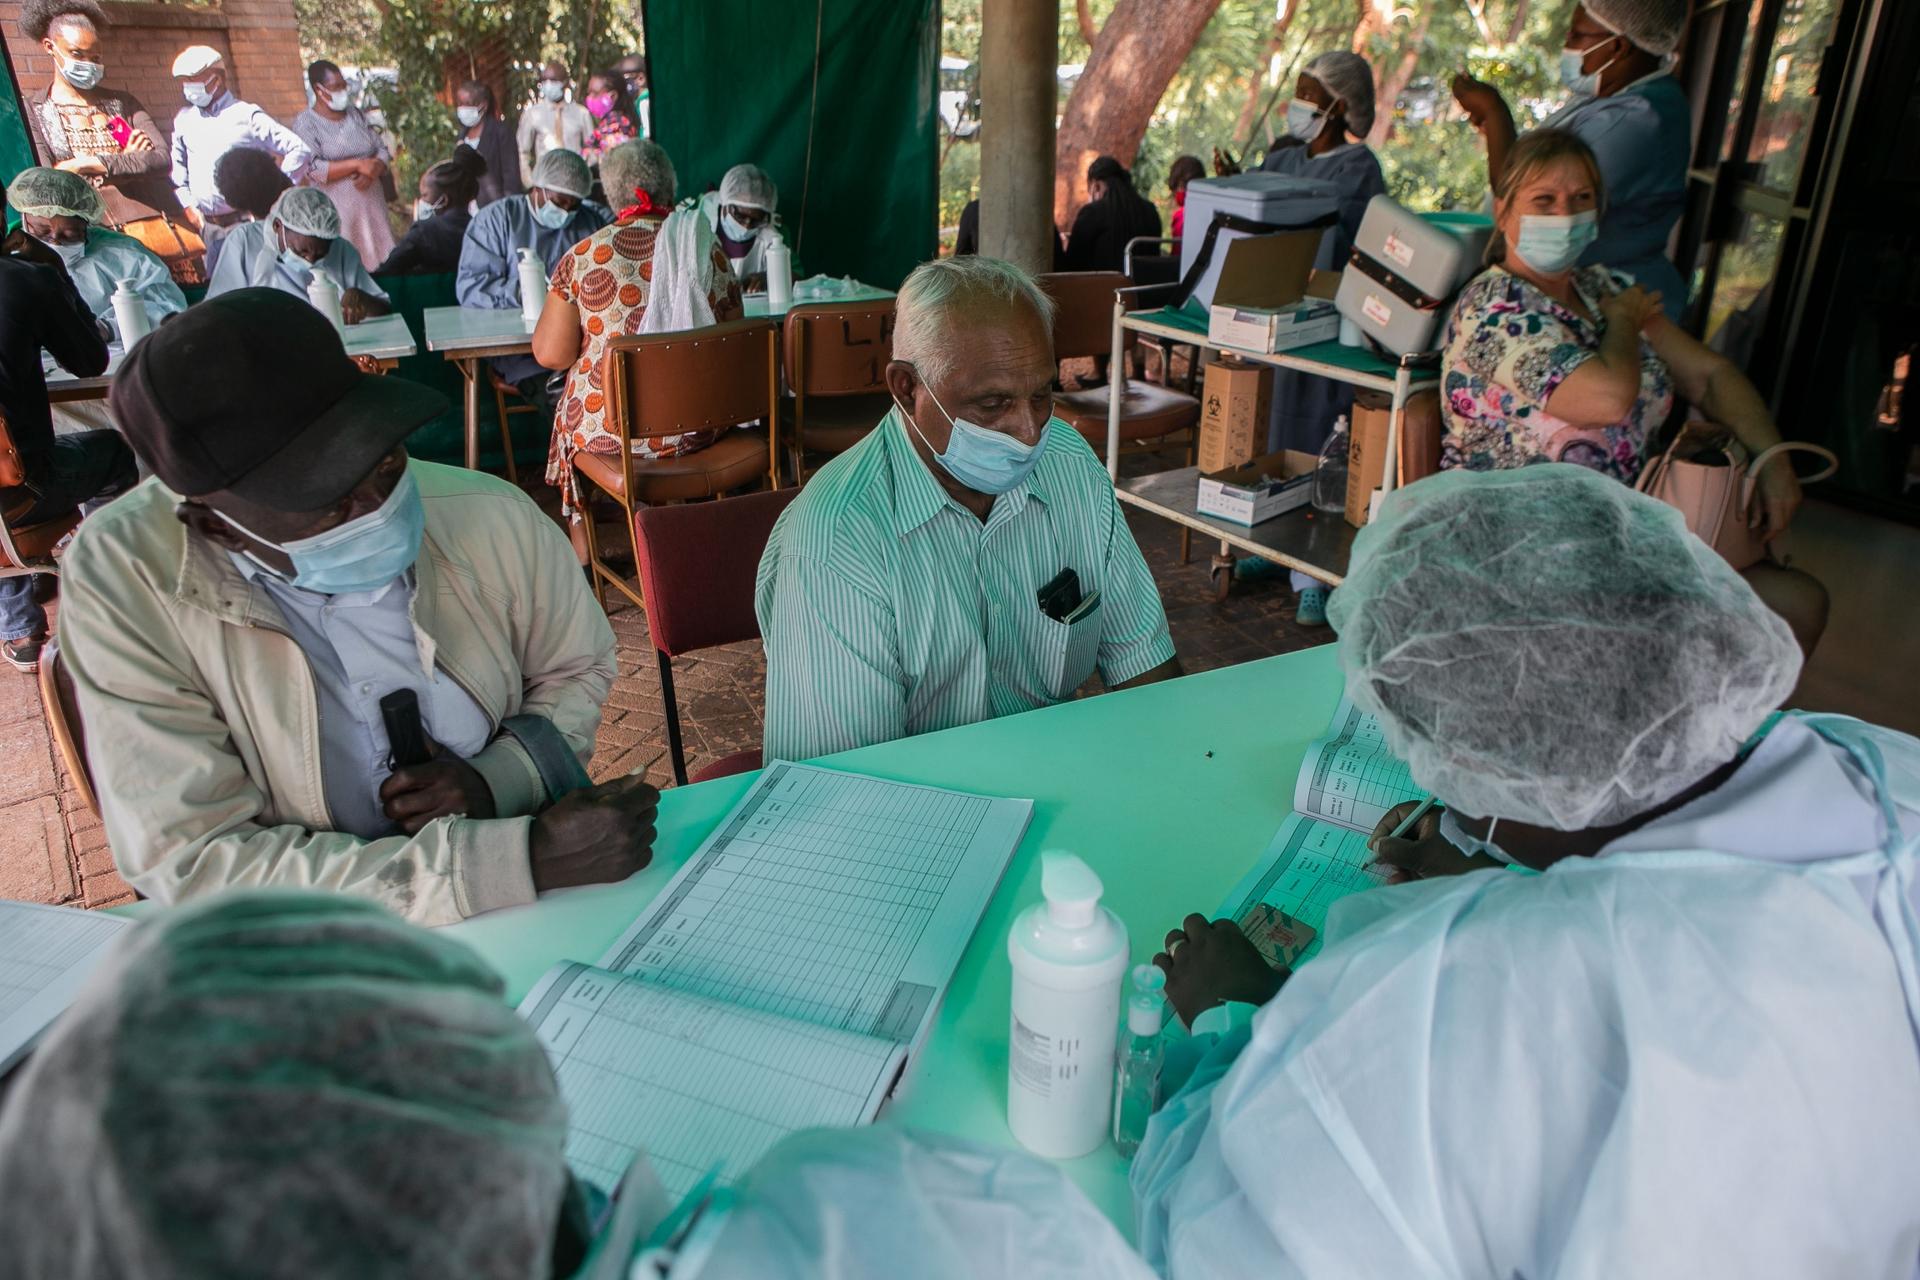 Citizens receive vaccinations with PPE-wearing health workers